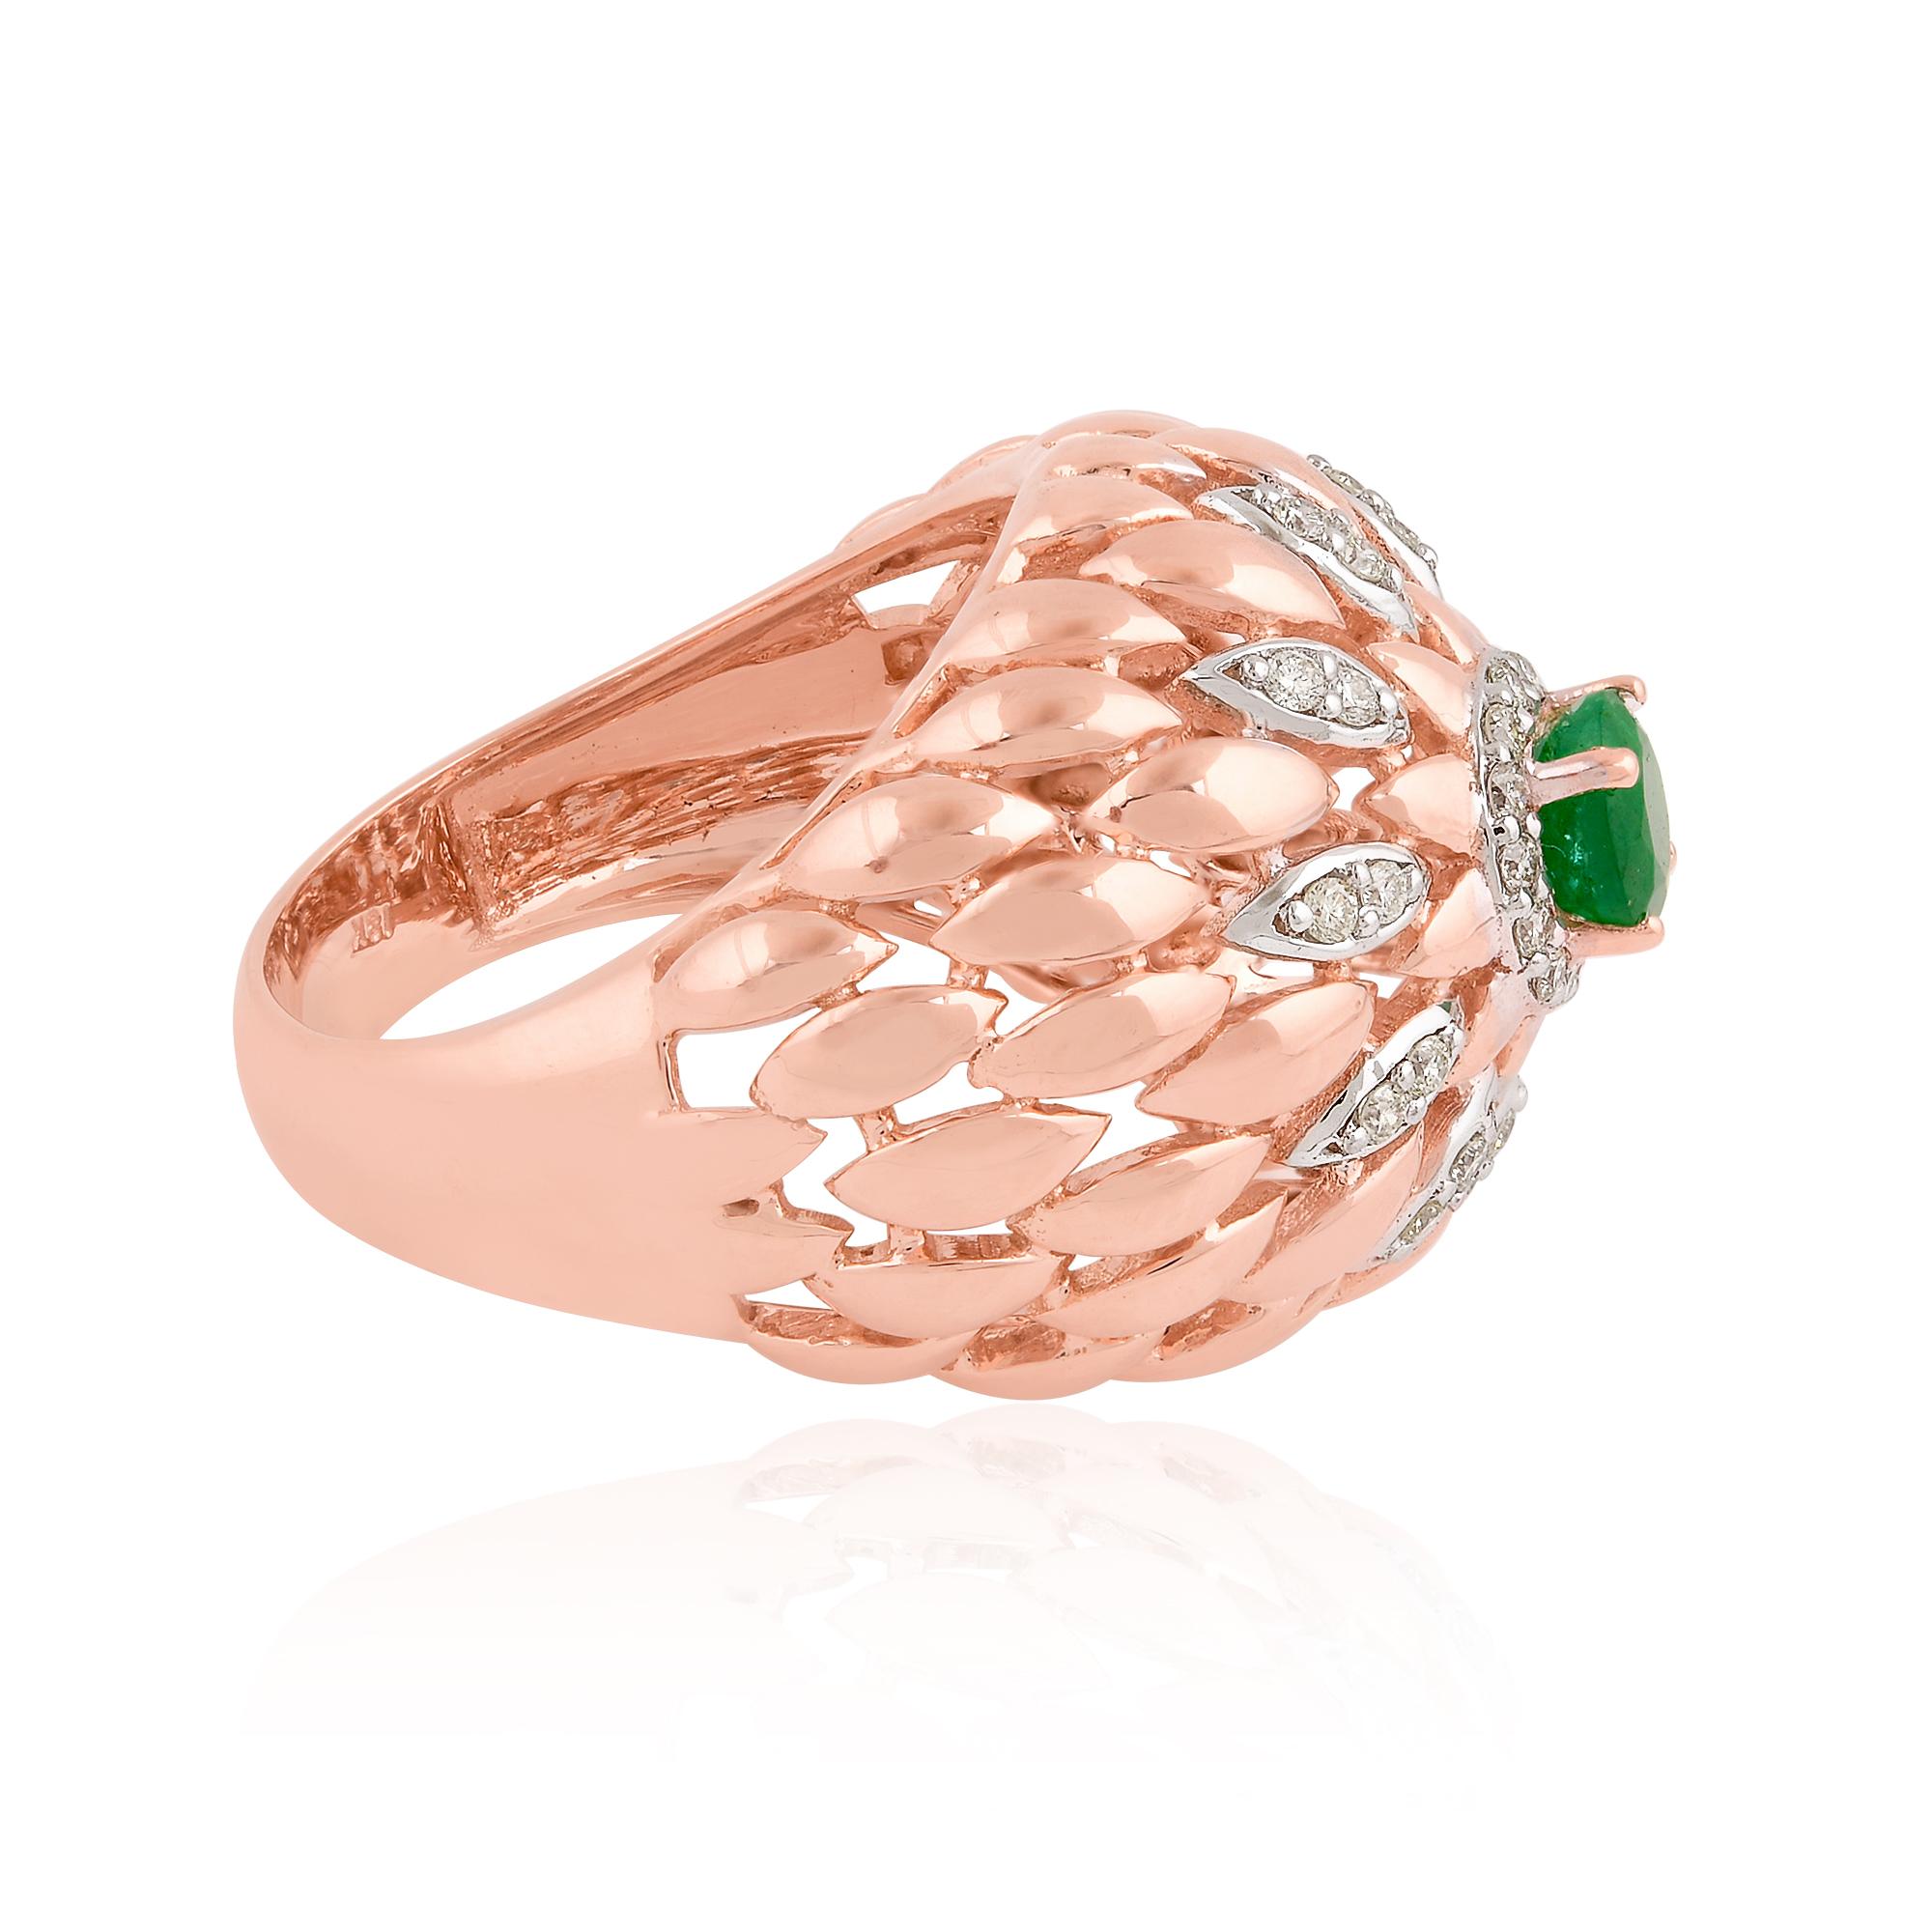 Item Code:- SER-2465A (14k)
Gross Wt :- 9.63 gm
14k Rose Gold Wt :- 8.62 gm
Natural Diamond Wt :- 0.35 ct ( AVERAGE DIAMOND CLARITY SI1-SI2 & COLOR H-I )
Zambian Emerald Wt :- 0.66 ct.
Ring Size :- 7 US & All size available

✦